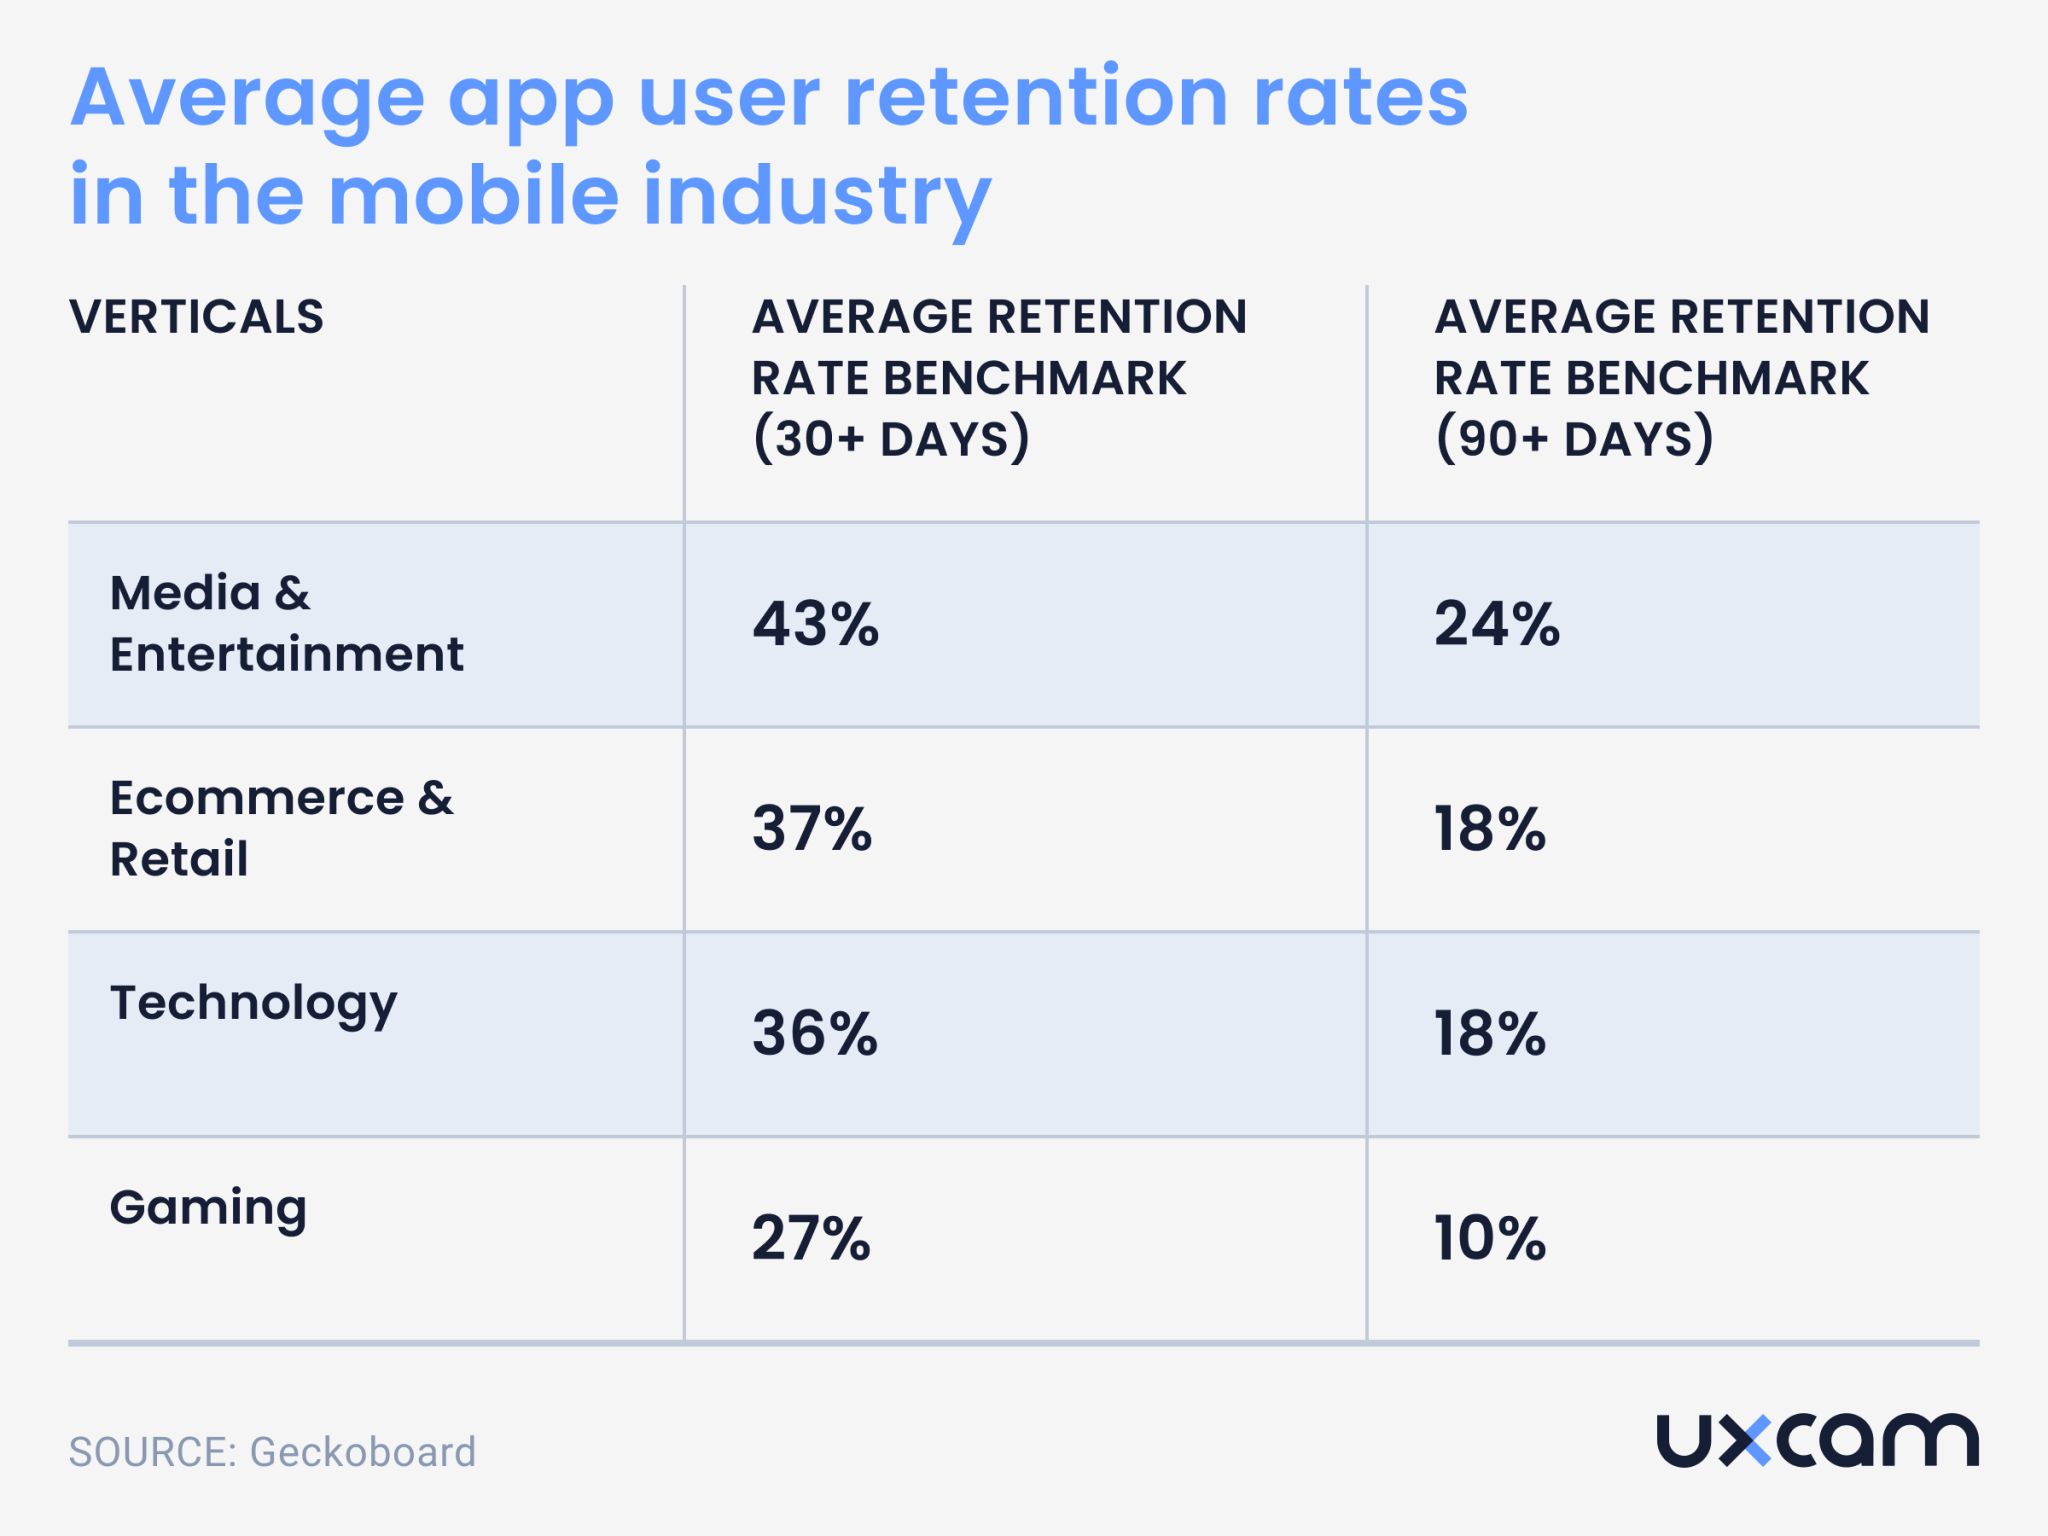 How In-App Surveys Can Help You Reduce Funnel Drop-Off Rate